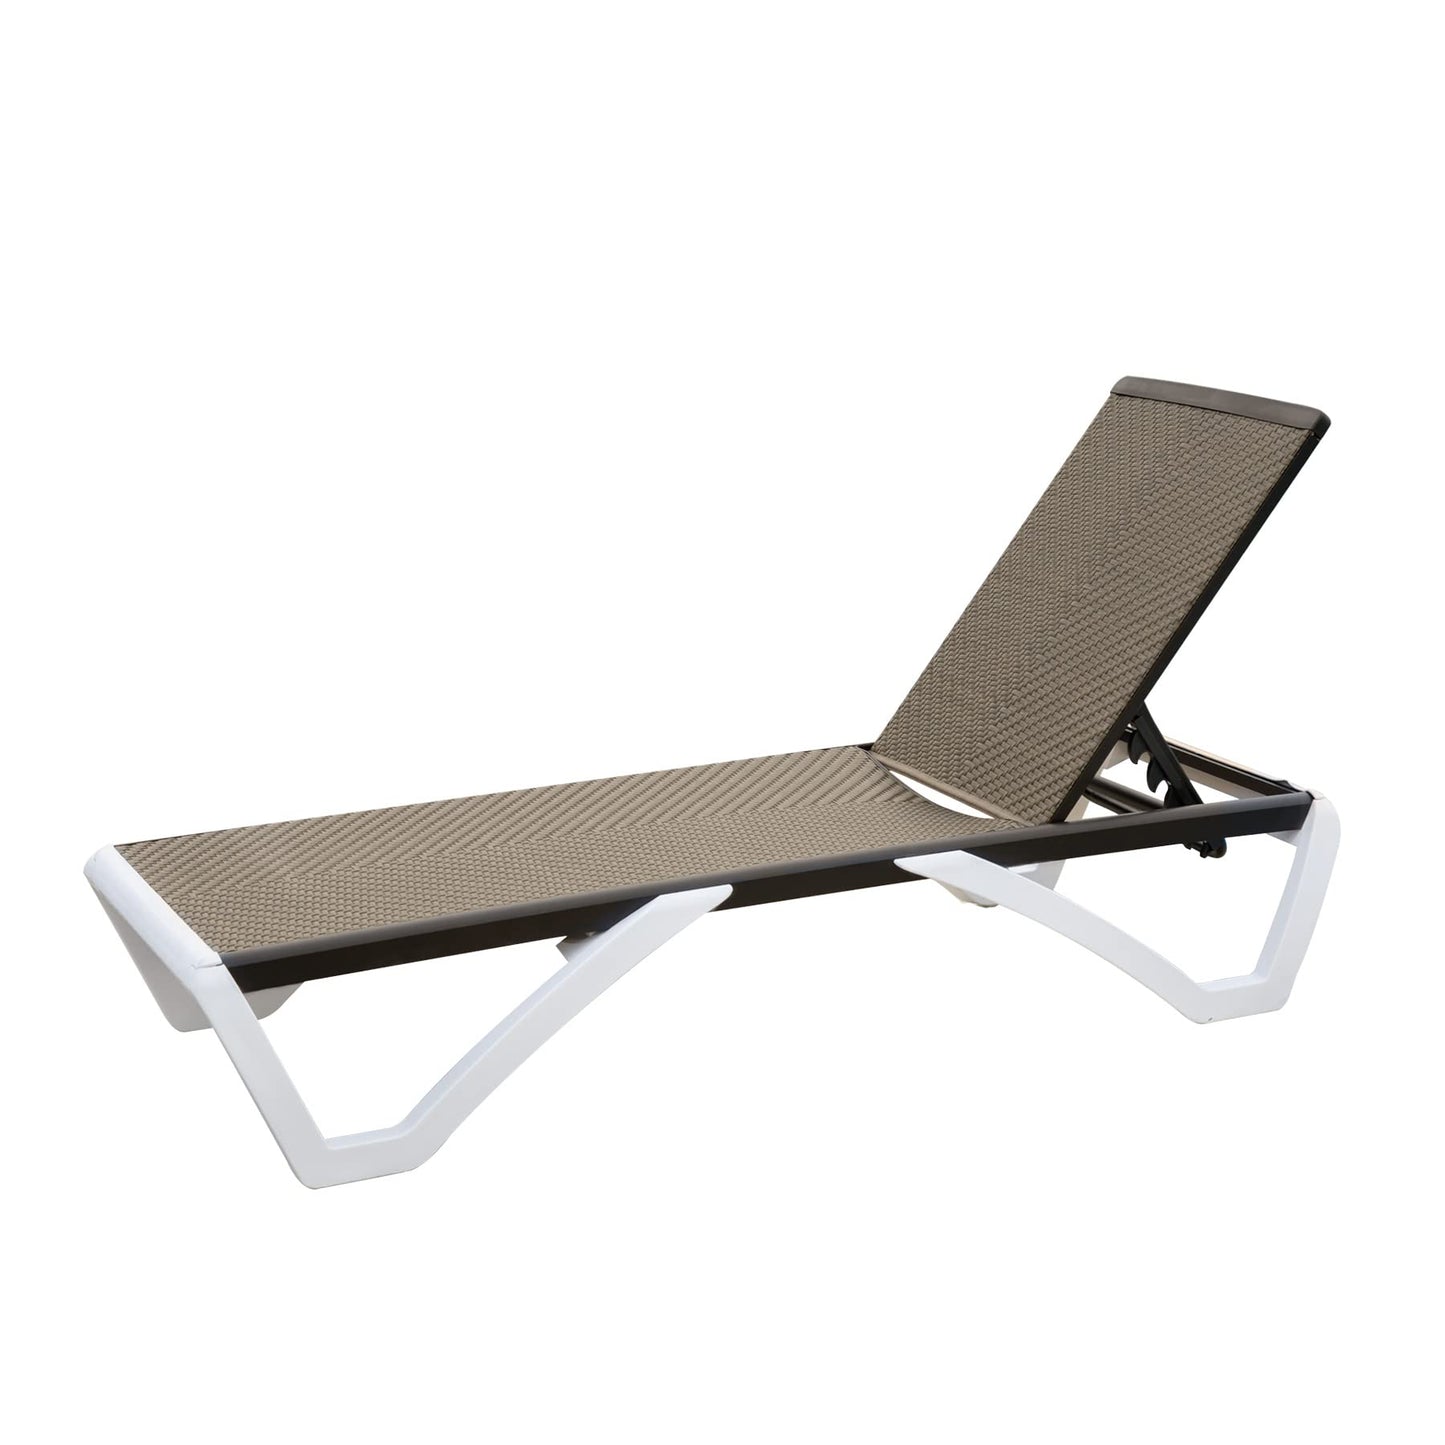 Patio Chaise Lounge Outdoor Aluminum Polypropylene Chair with Adjustable Backrest, Beach